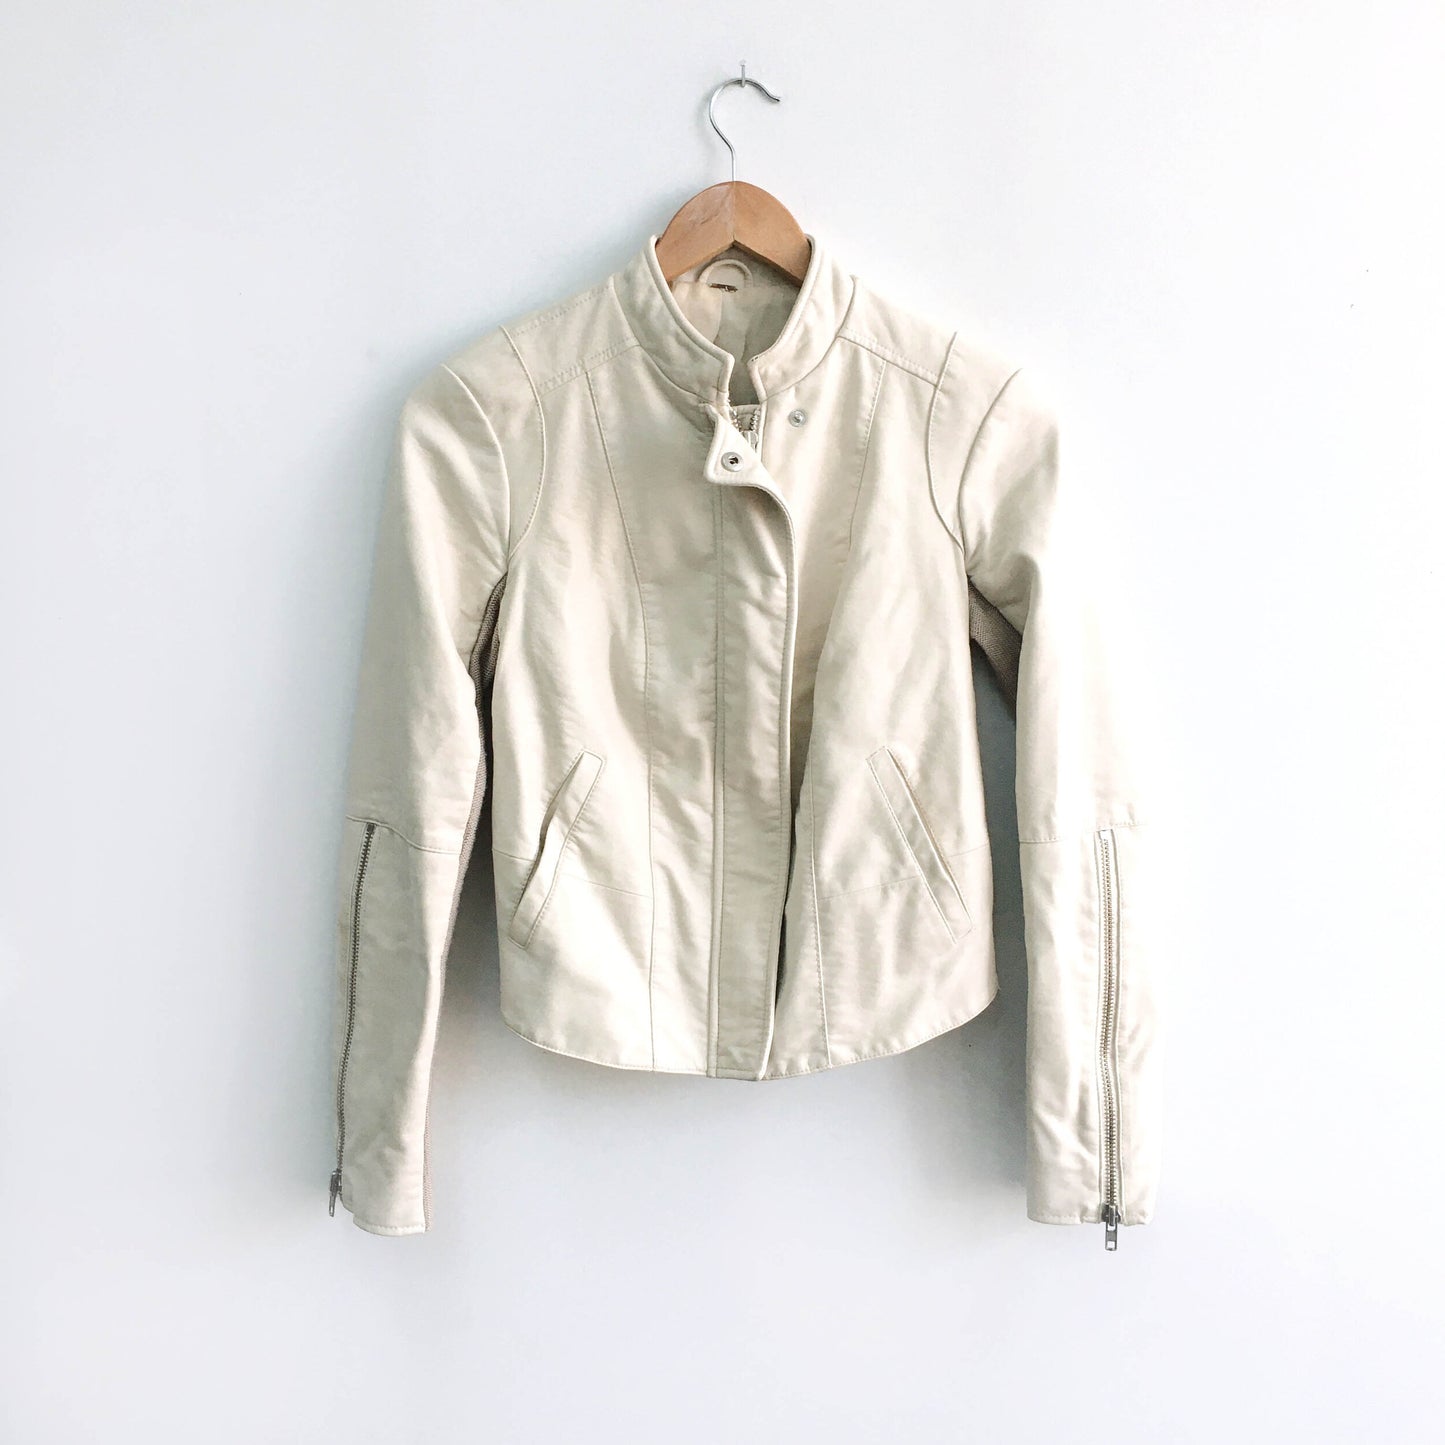 Free People Cool and Clean Vegan Moto Jacket - size xs